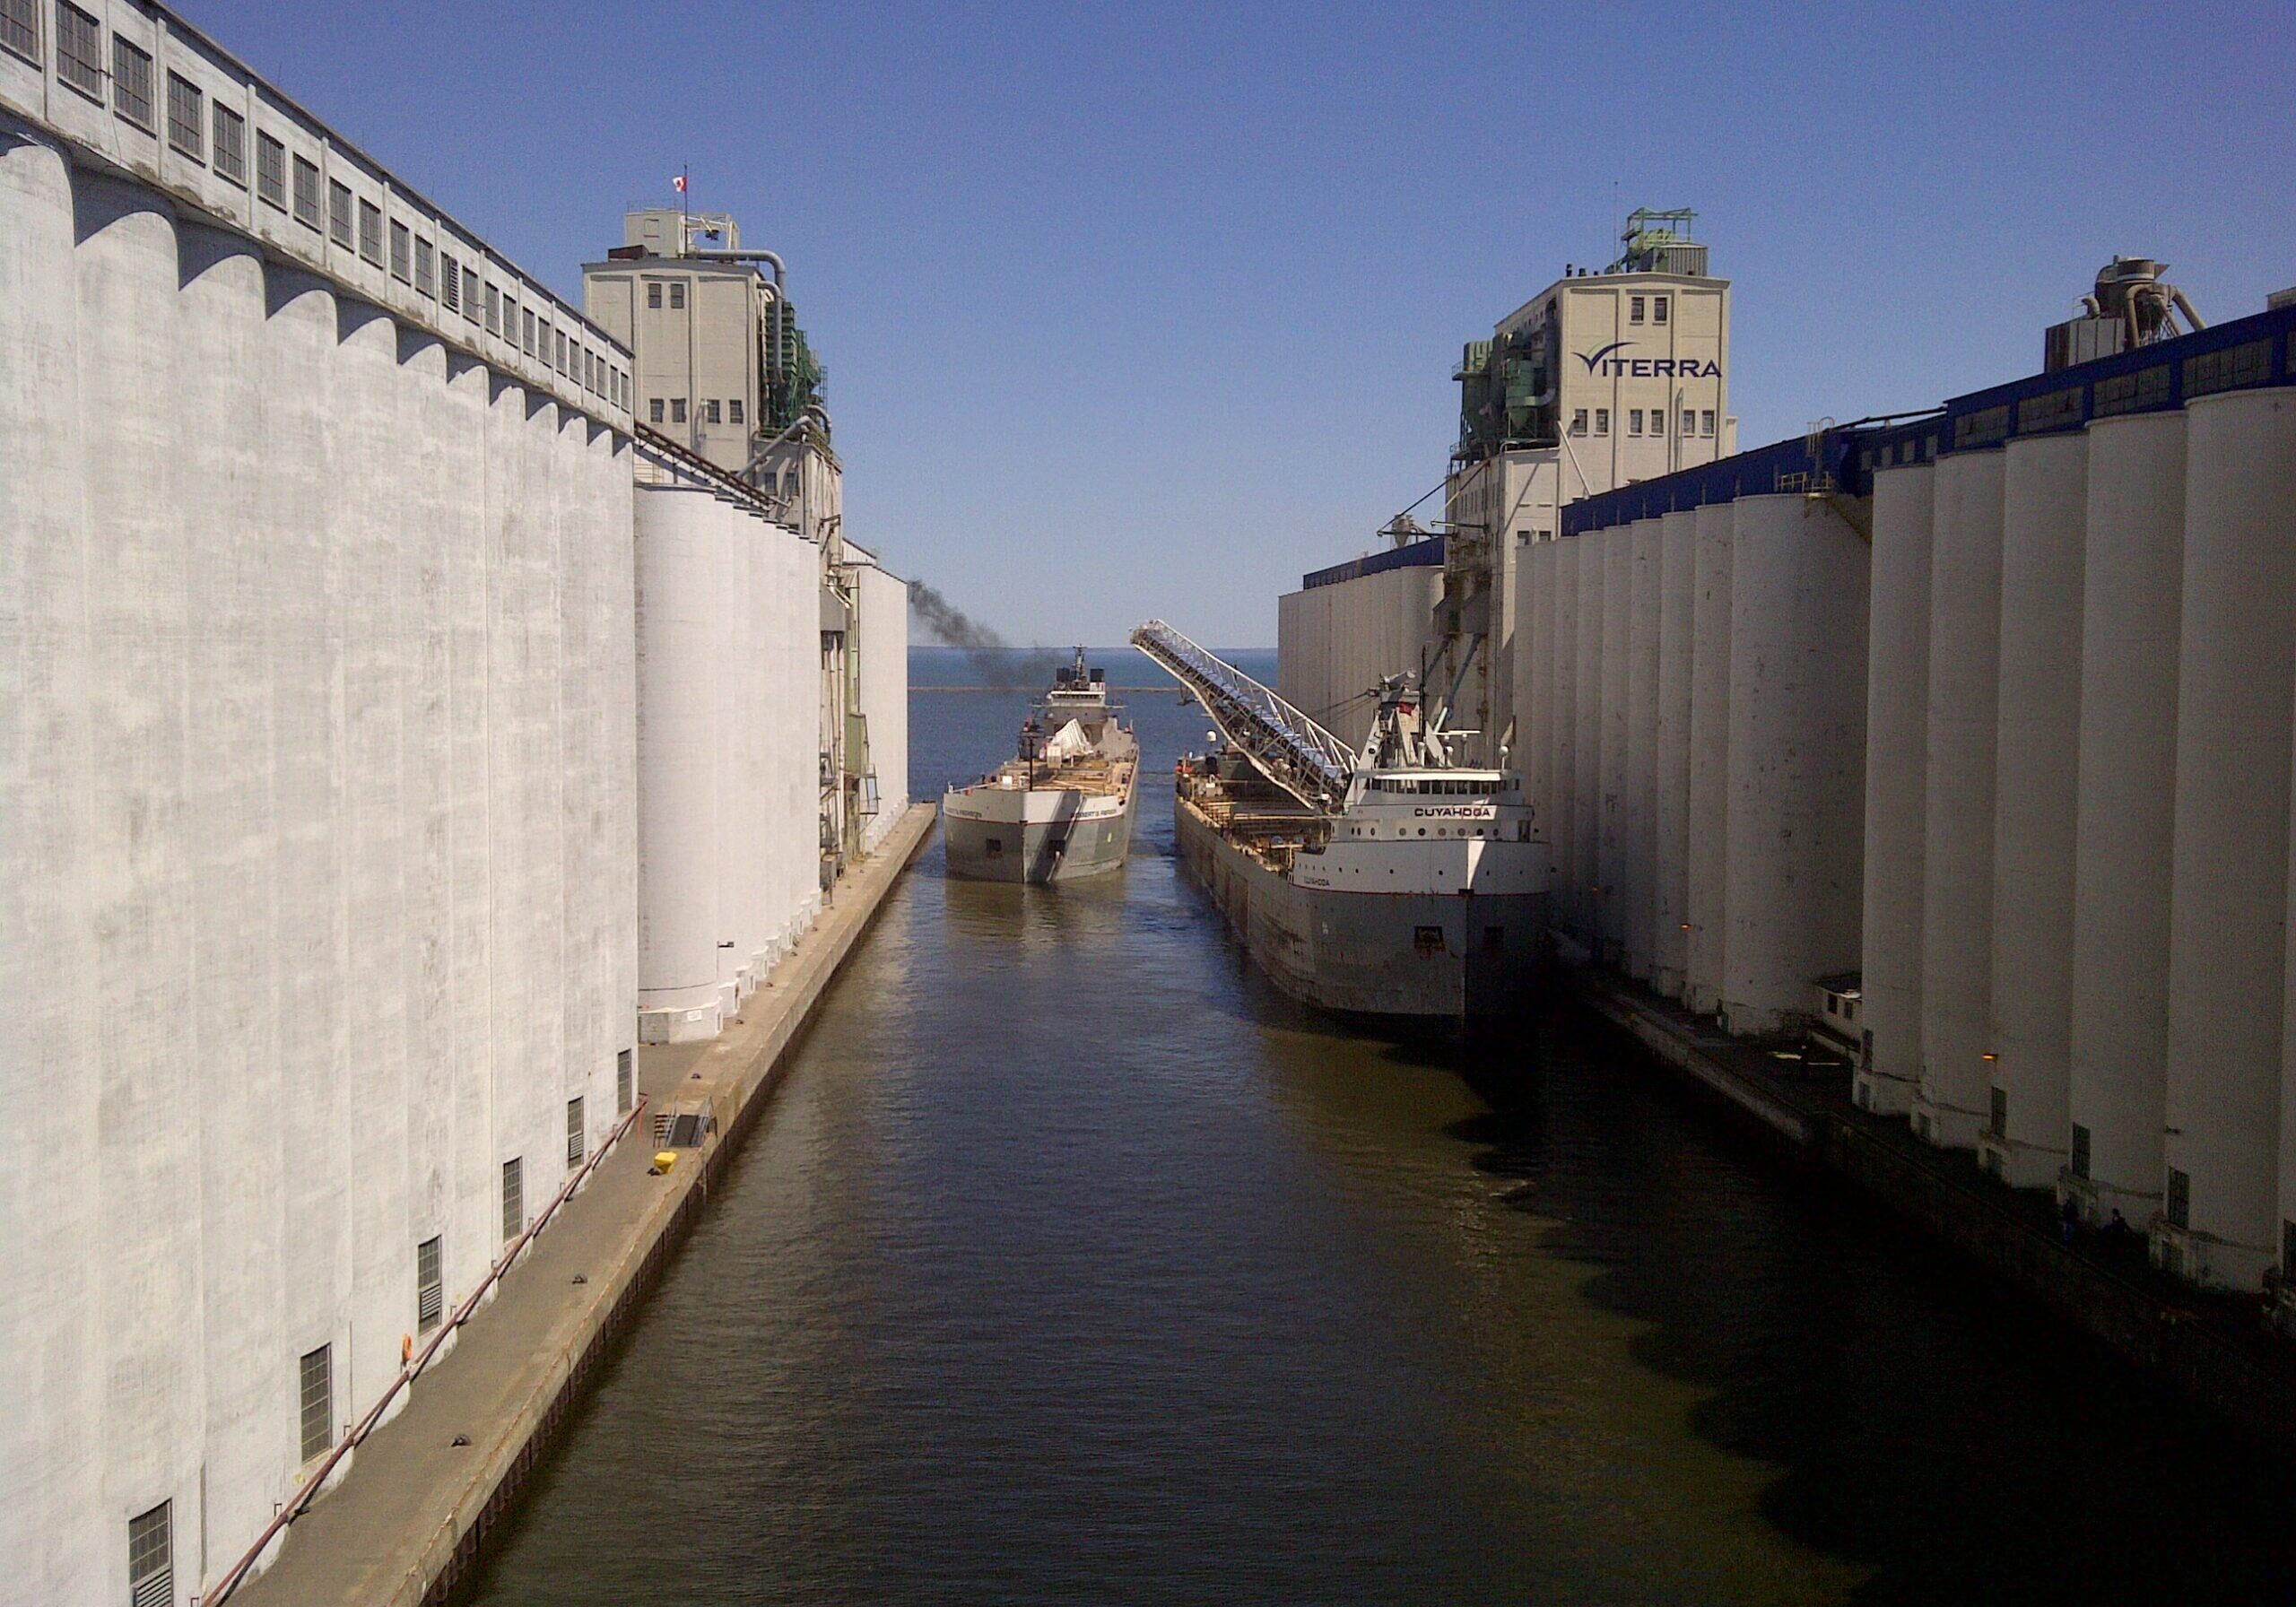 Canada Malting and Viterr B two vessels in slip (3)